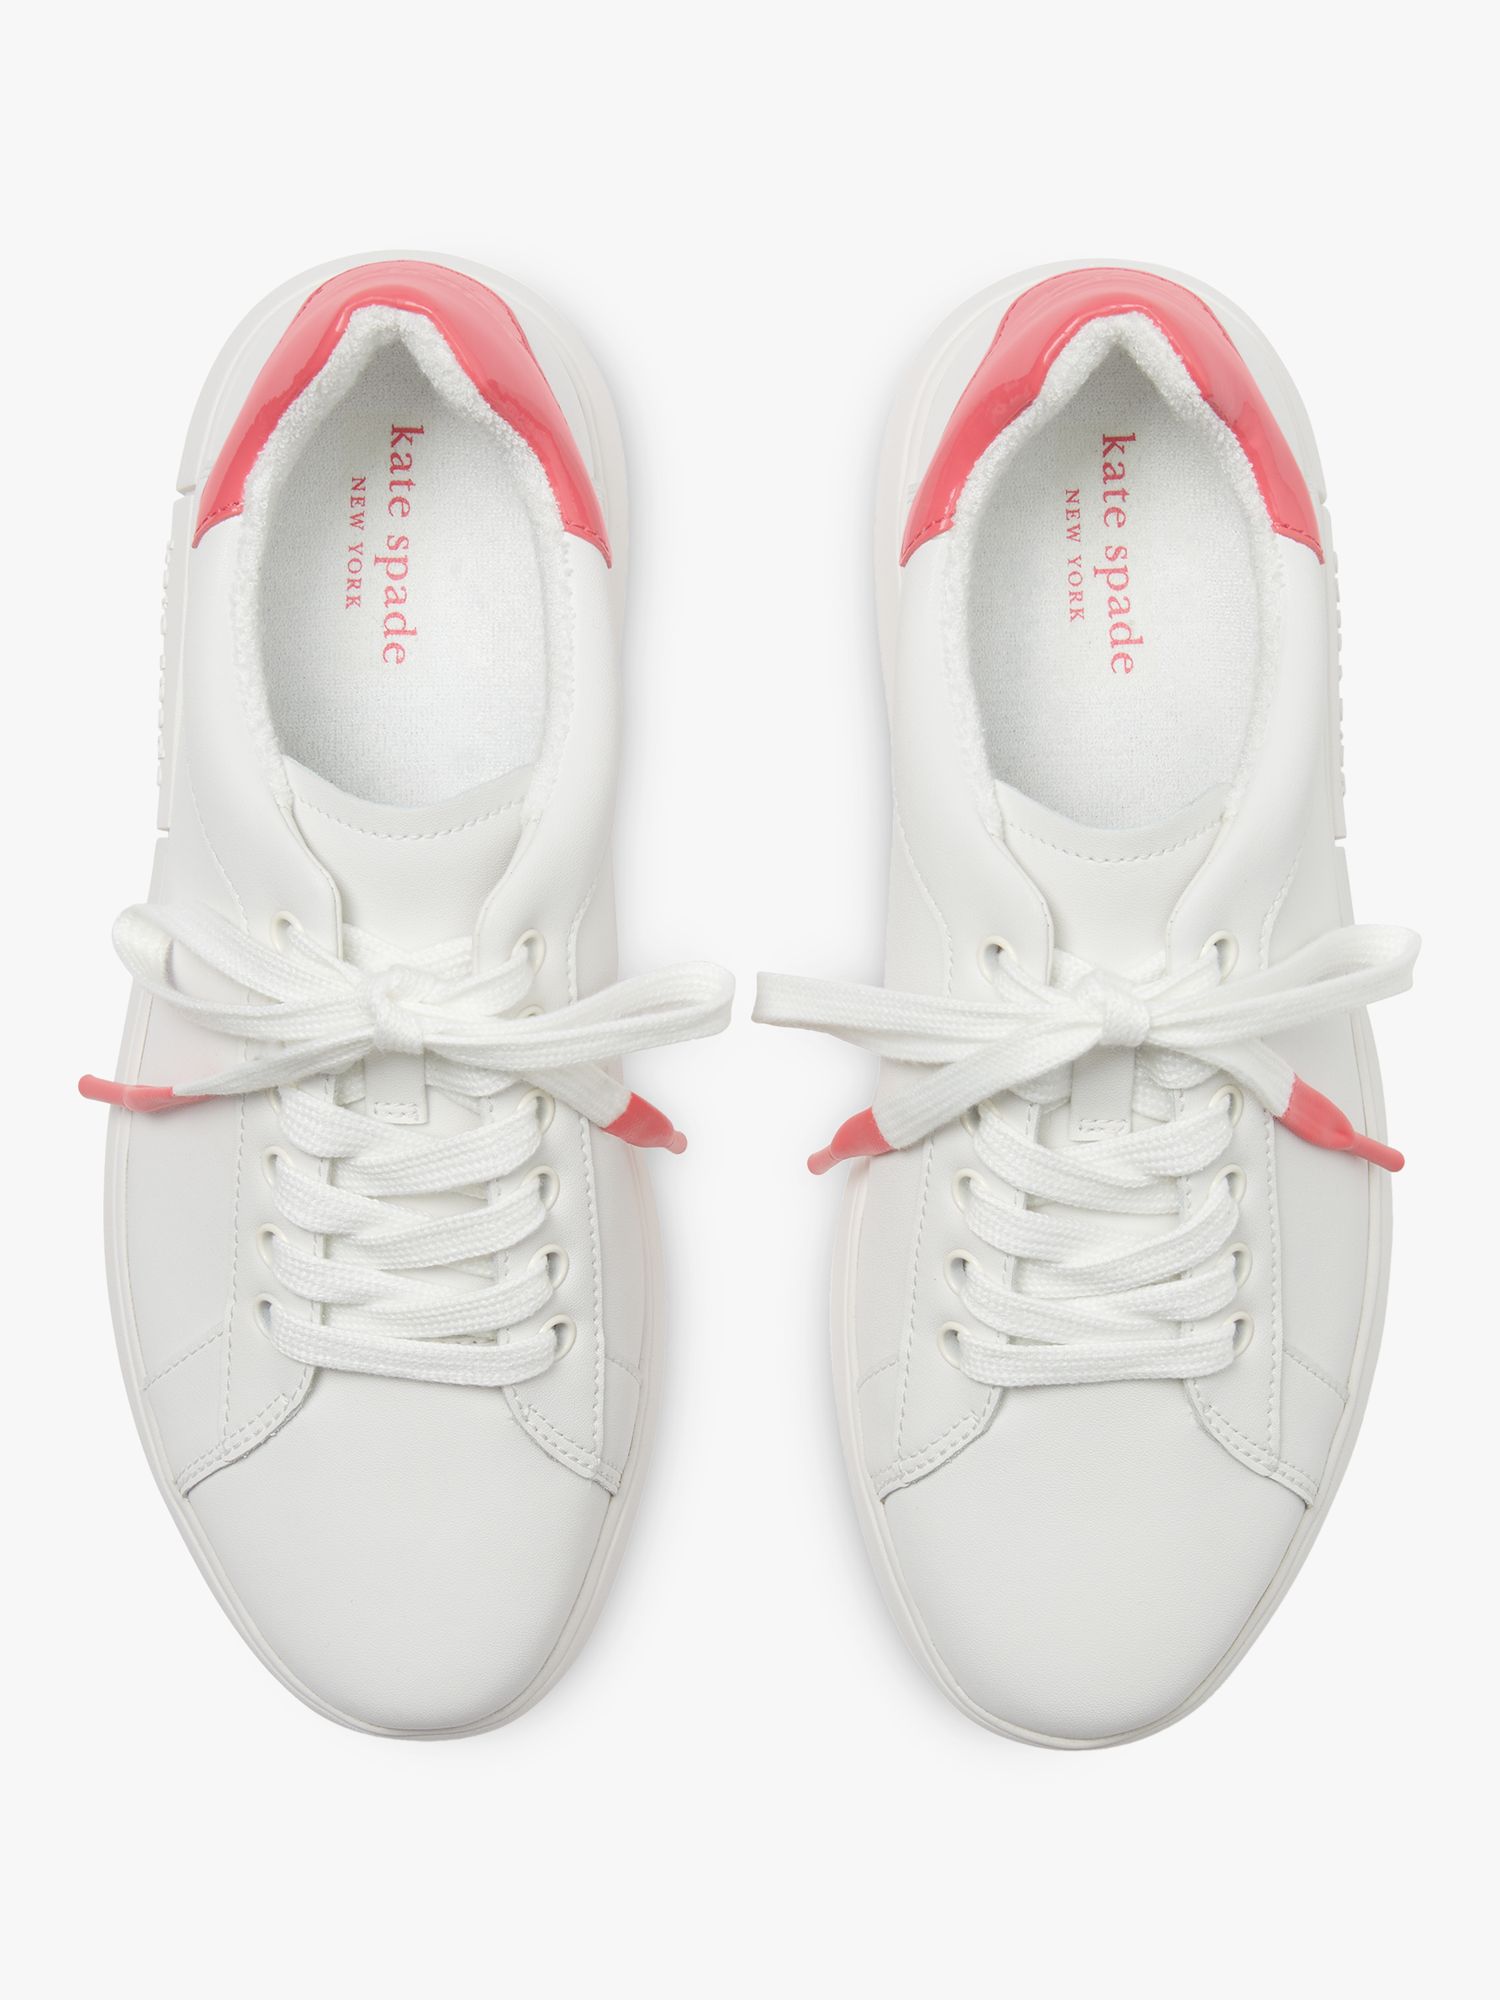 kate spade new york Low Top Leather Trainers